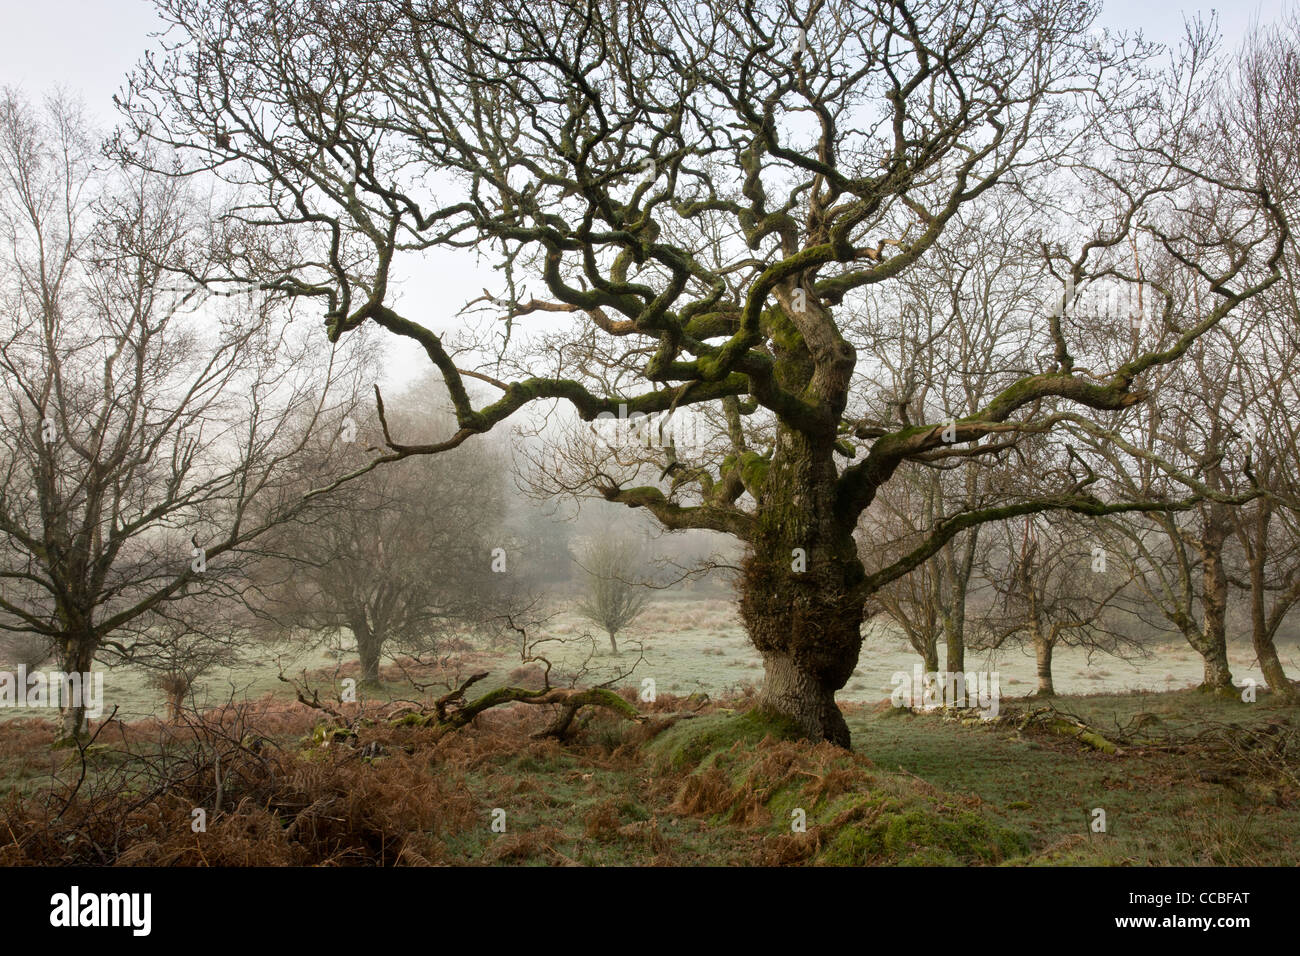 Common oak trees in Whiddon, or Whyddon Deer Park. 16th century old park, Teign Valley, Dartmoor. Stock Photo